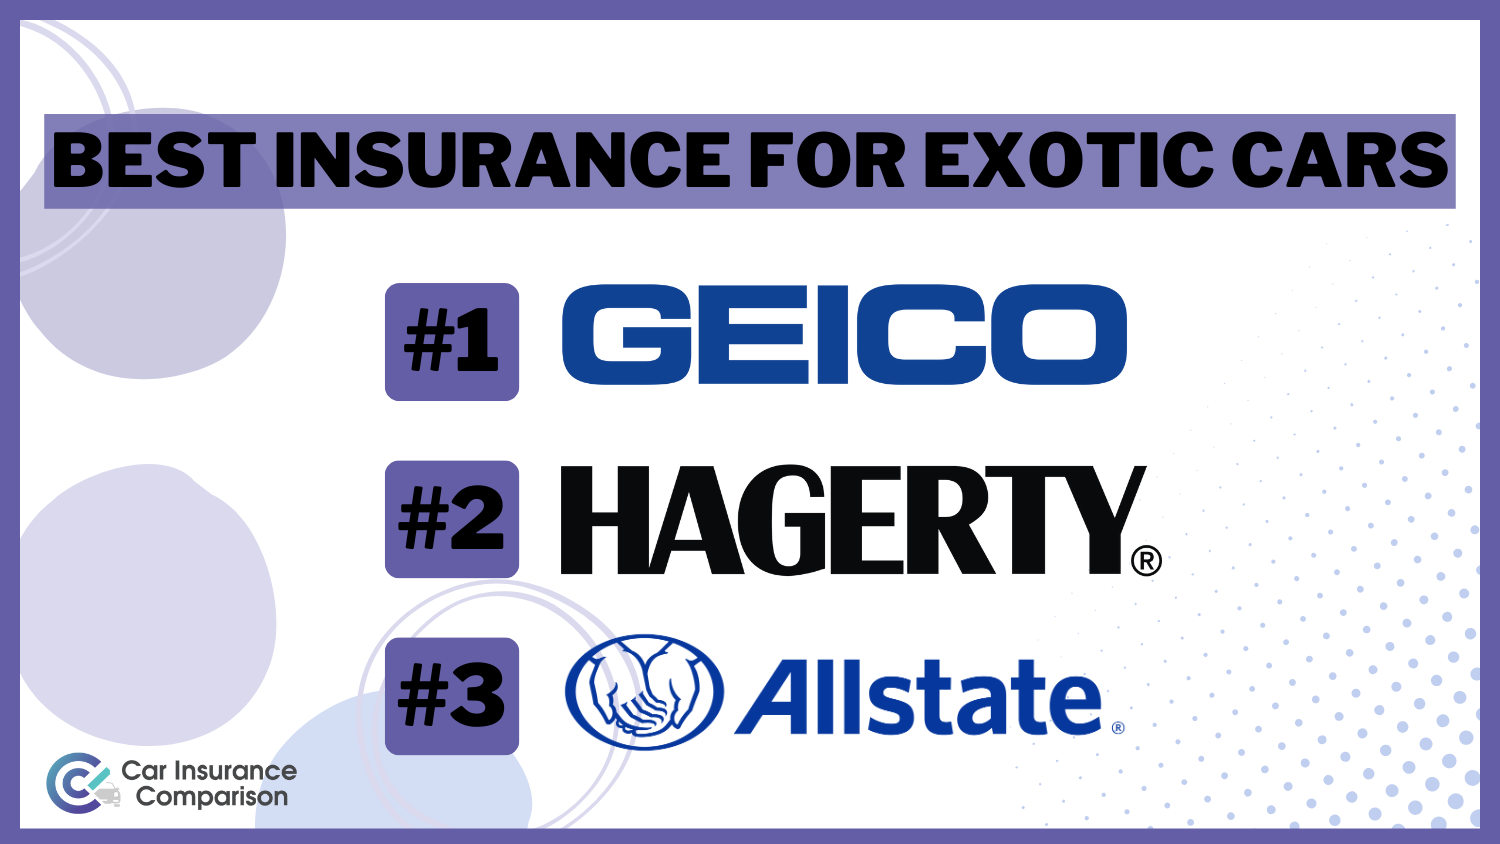 Best Insurance for Exotic Cars: Geico, Hagerty, and Allstate